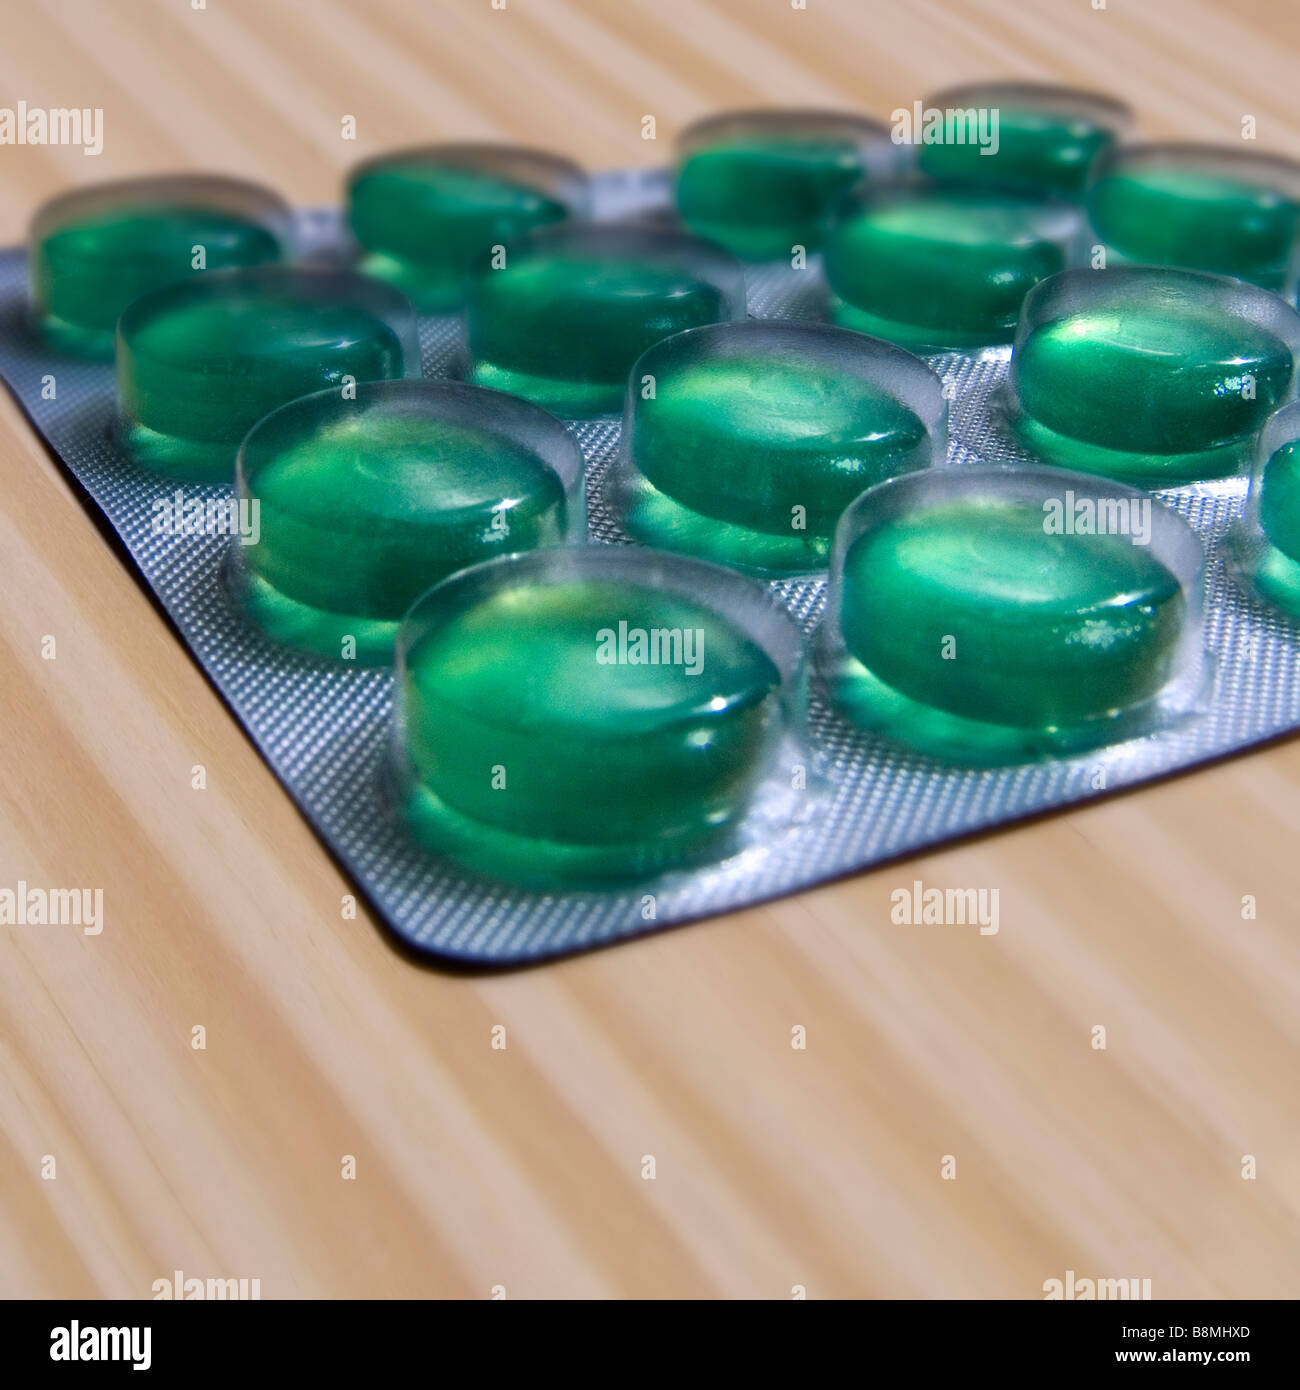 Green Throat Lozenges in a Blister Pack on a Wooden Surface Stock Photo